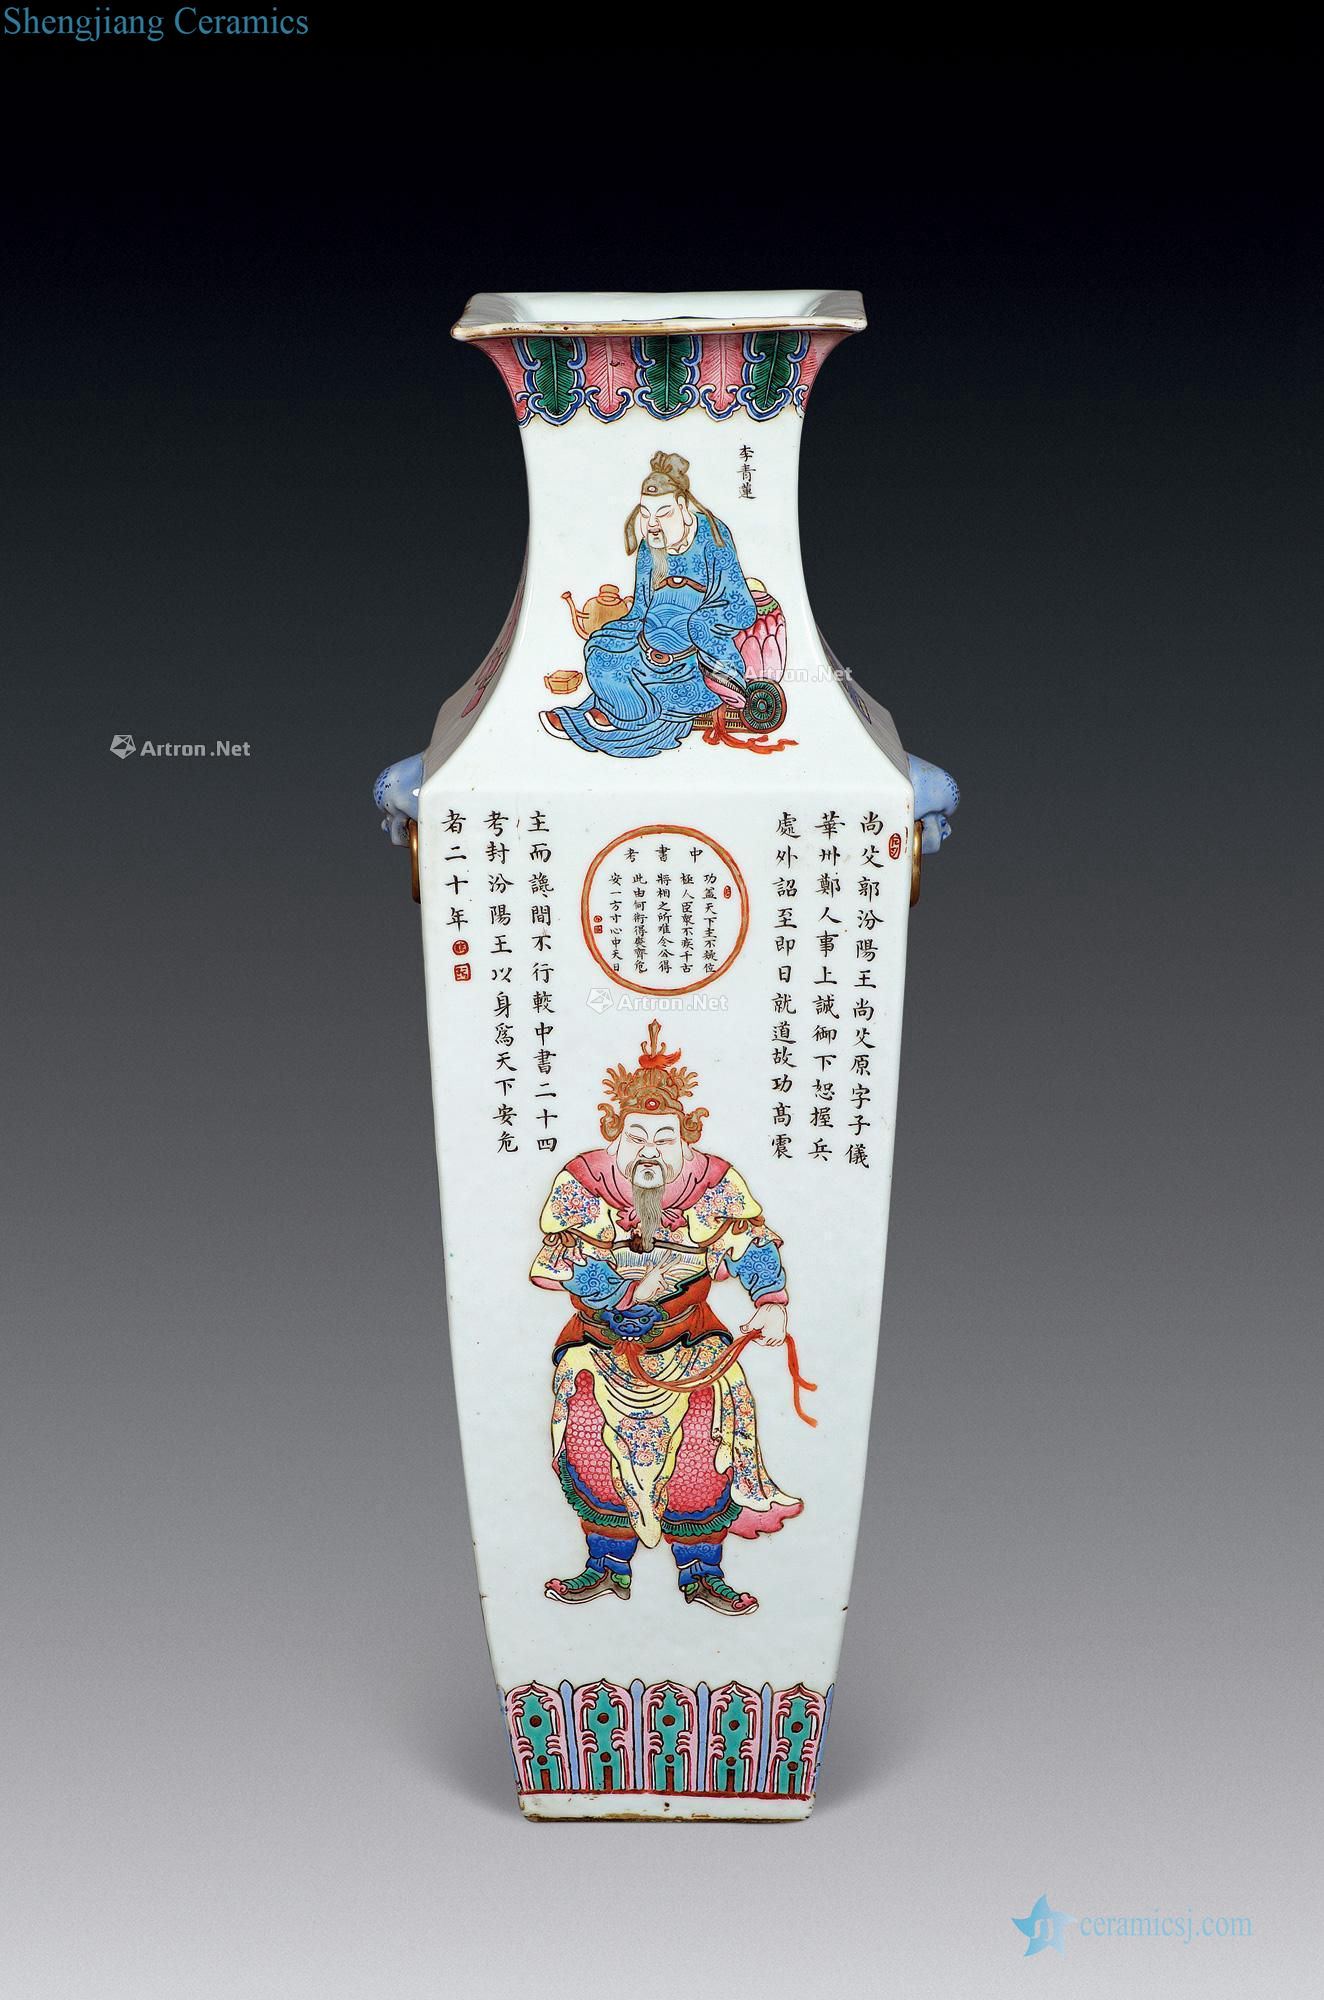 Pastel one like spectrum in the qing dynasty vase